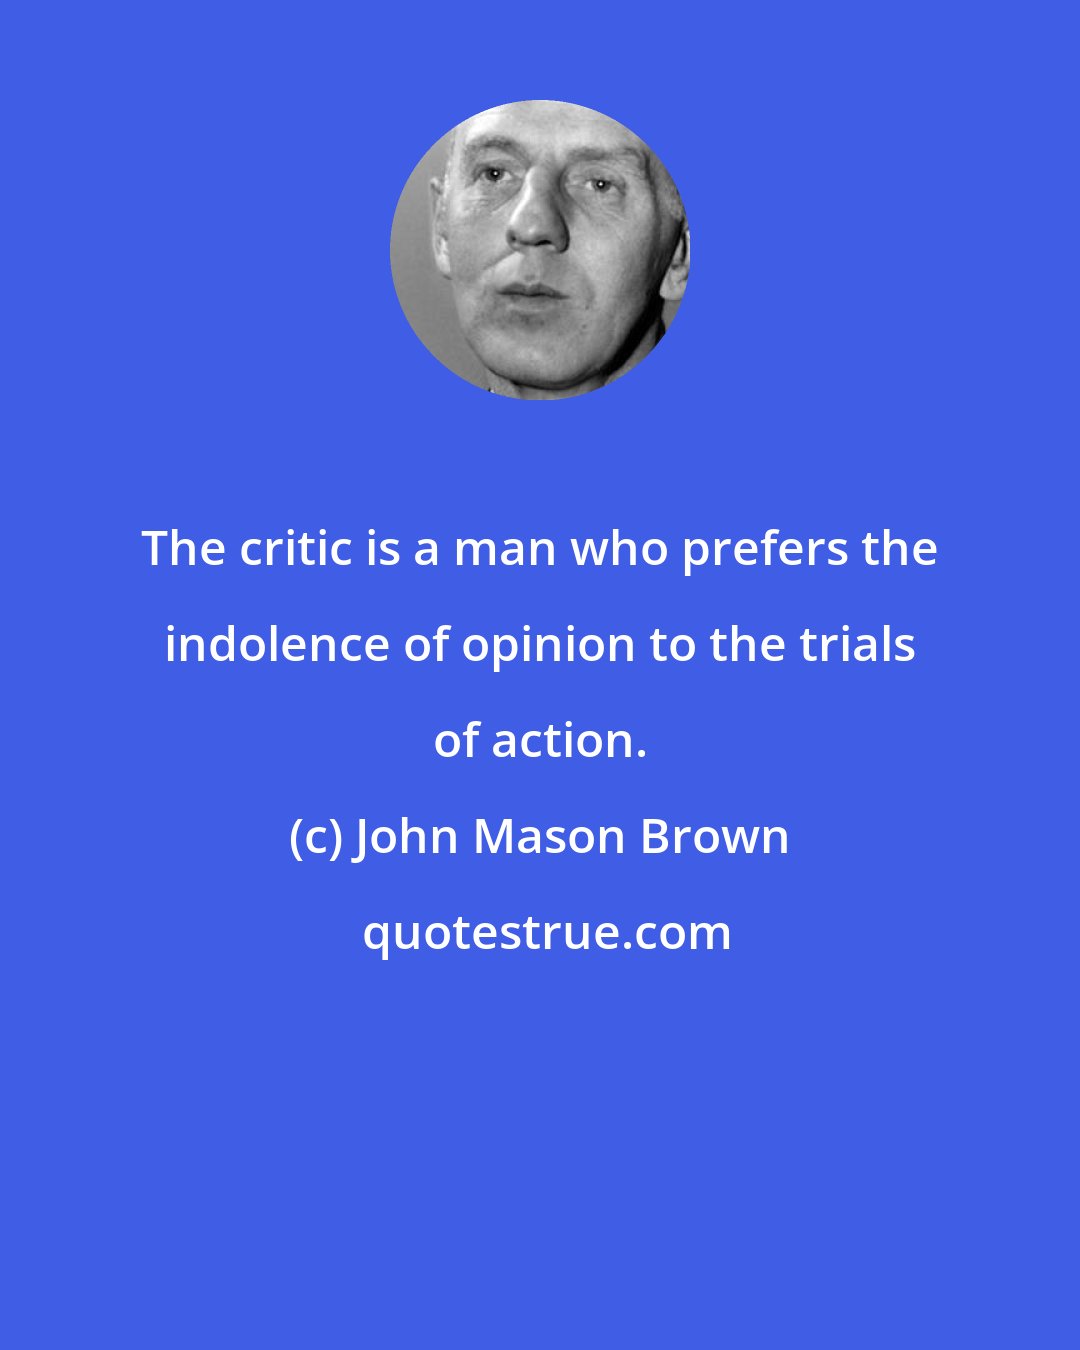 John Mason Brown: The critic is a man who prefers the indolence of opinion to the trials of action.